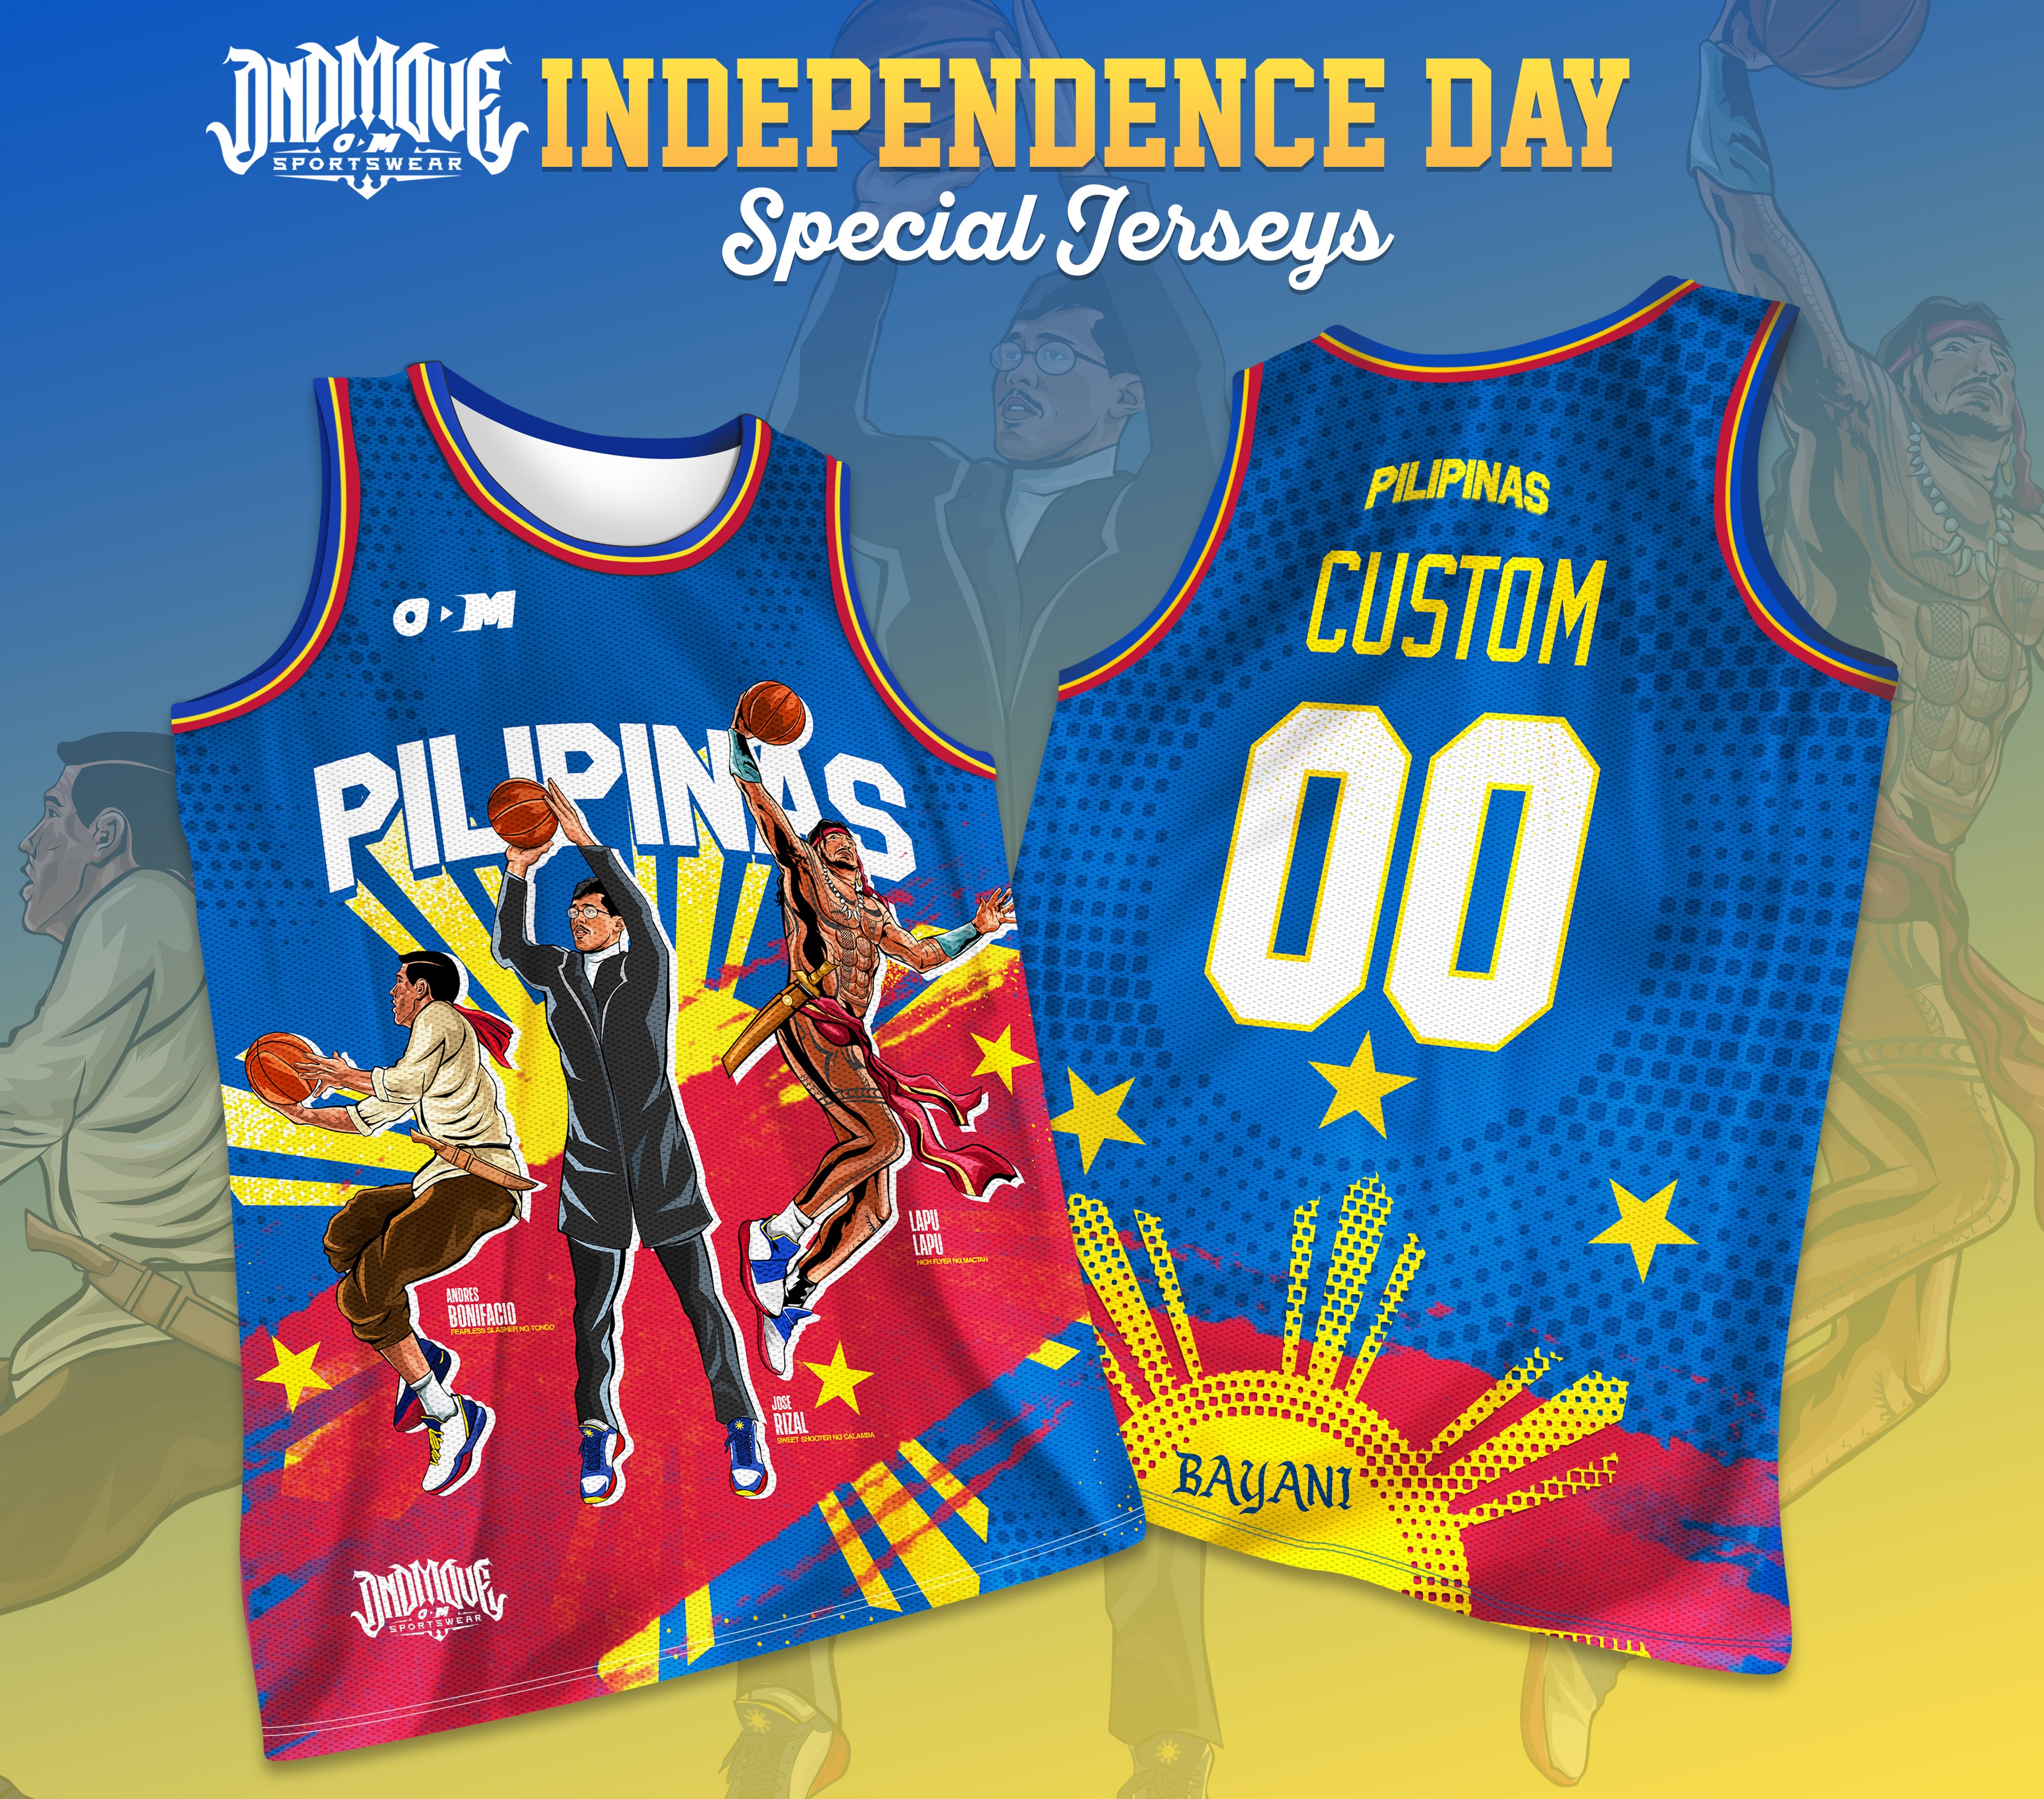 ODM INDEPENDENCE DAY JERSEY RELEASE (BLUE)